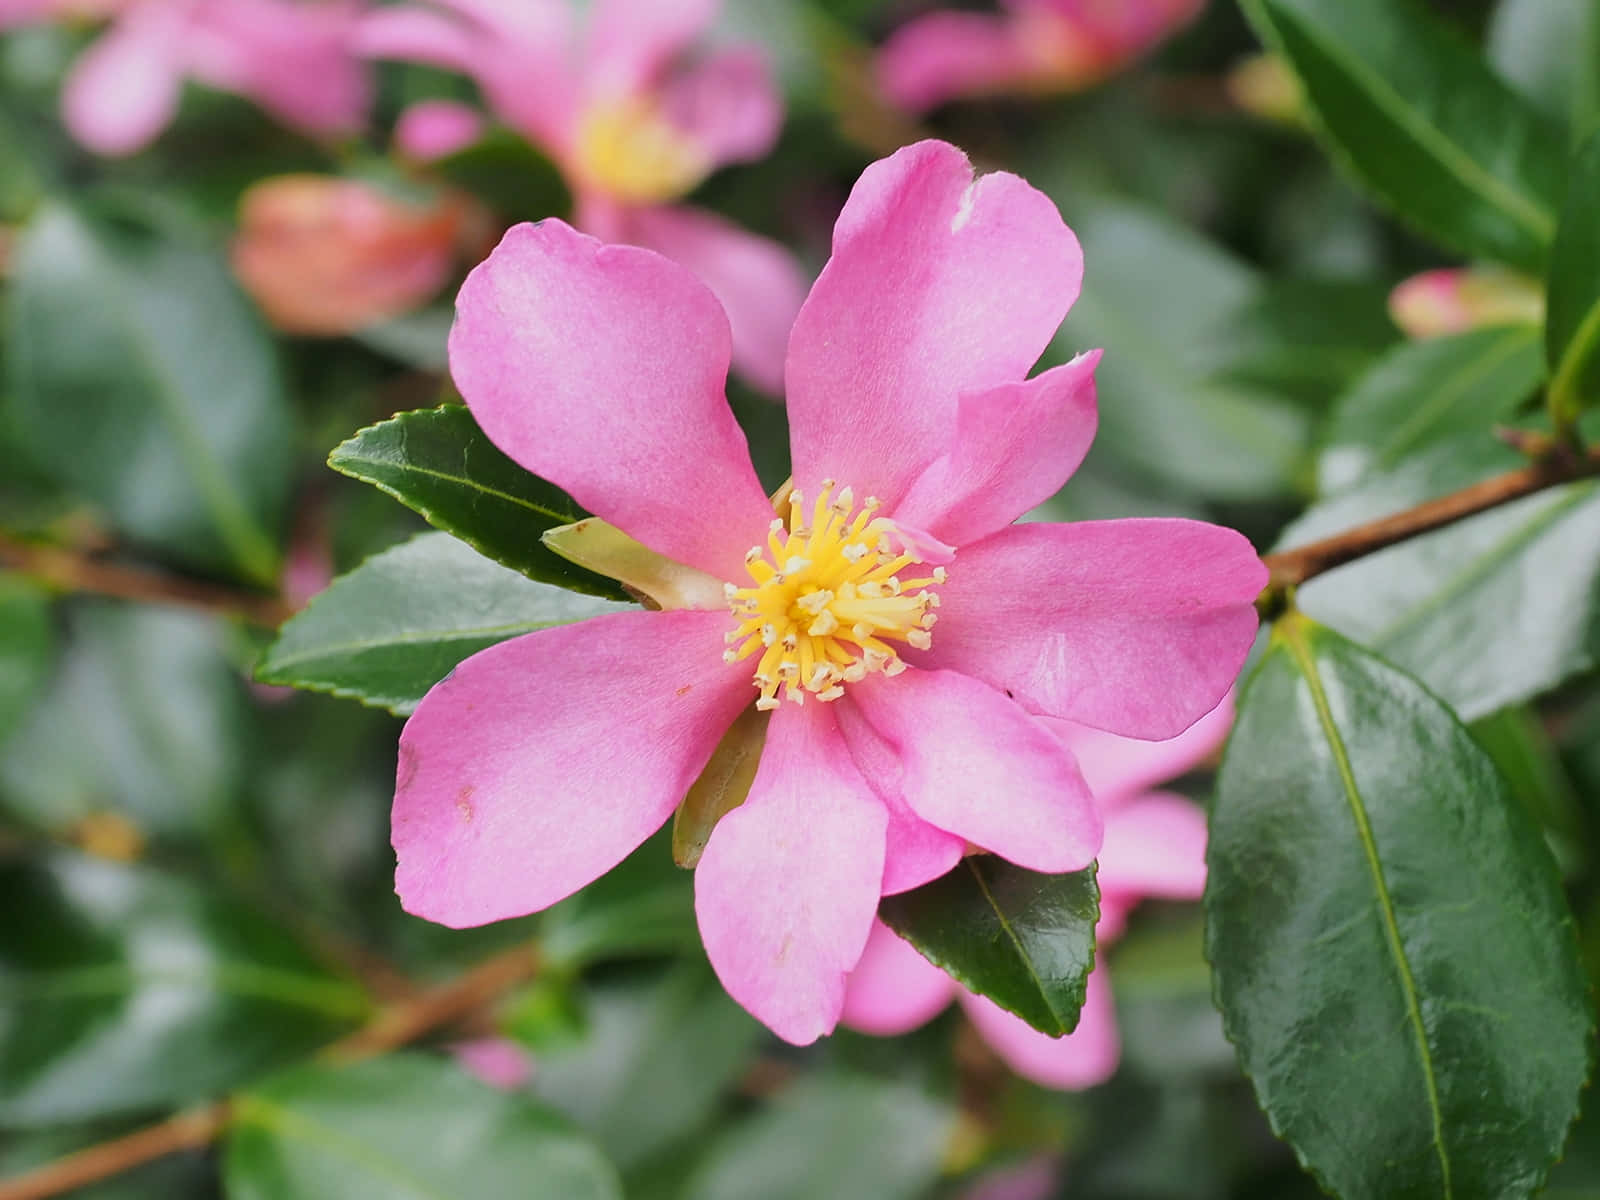 Camellia Sasanqua blooms brightly in the mid-winter